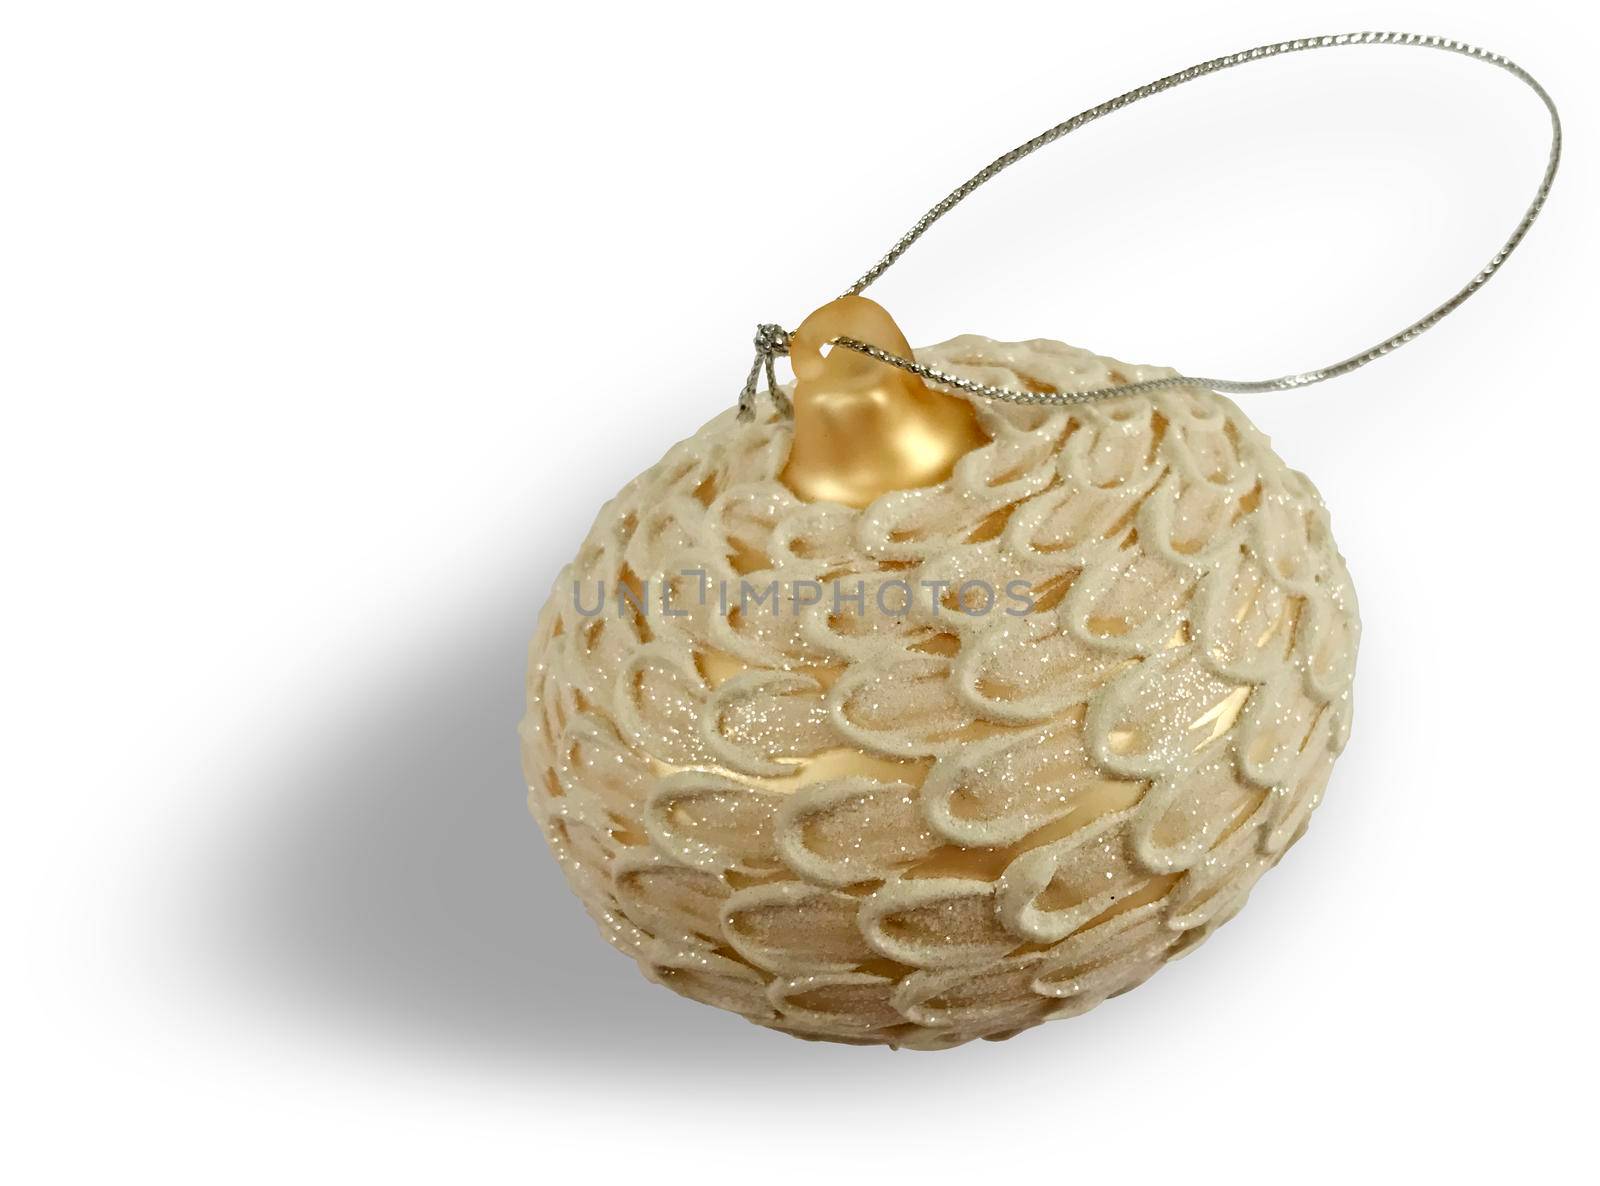 Beautiful Golden ball-decoration for the Christmas tree. Presented on a white background.